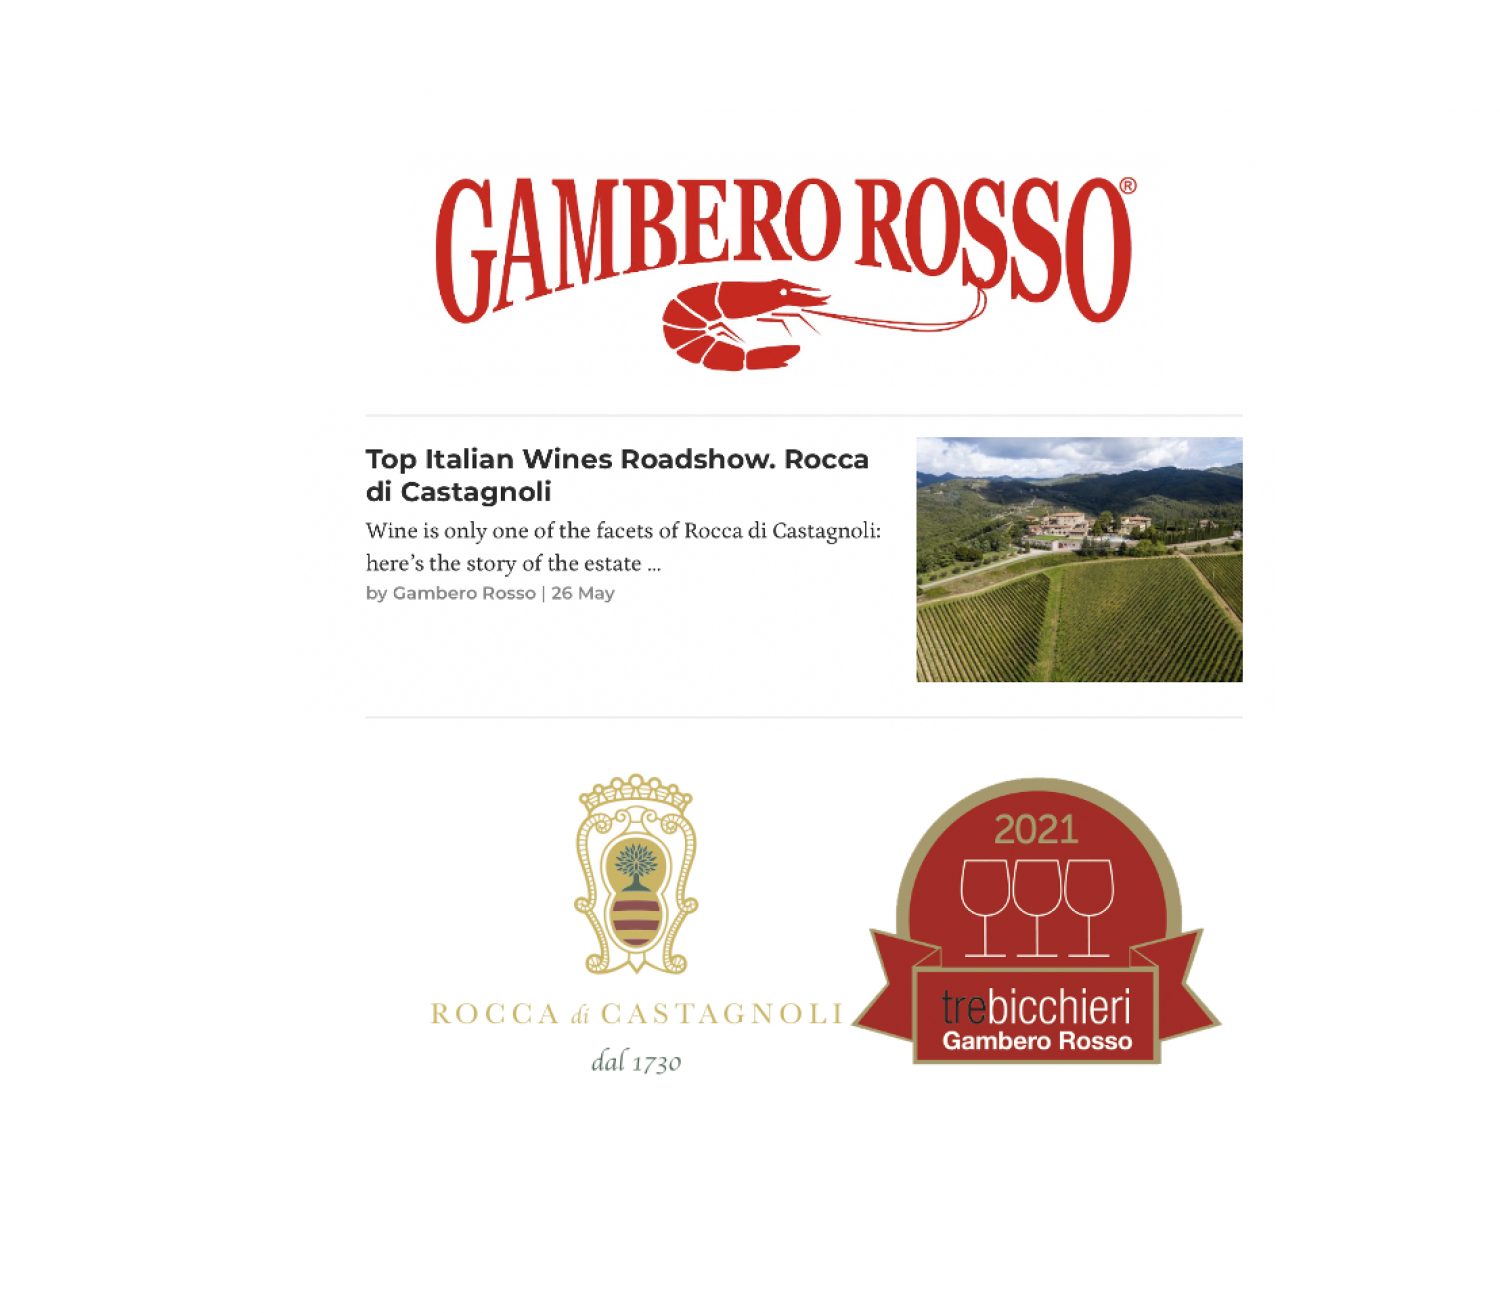 The last article about us is on Gambero Rosso International